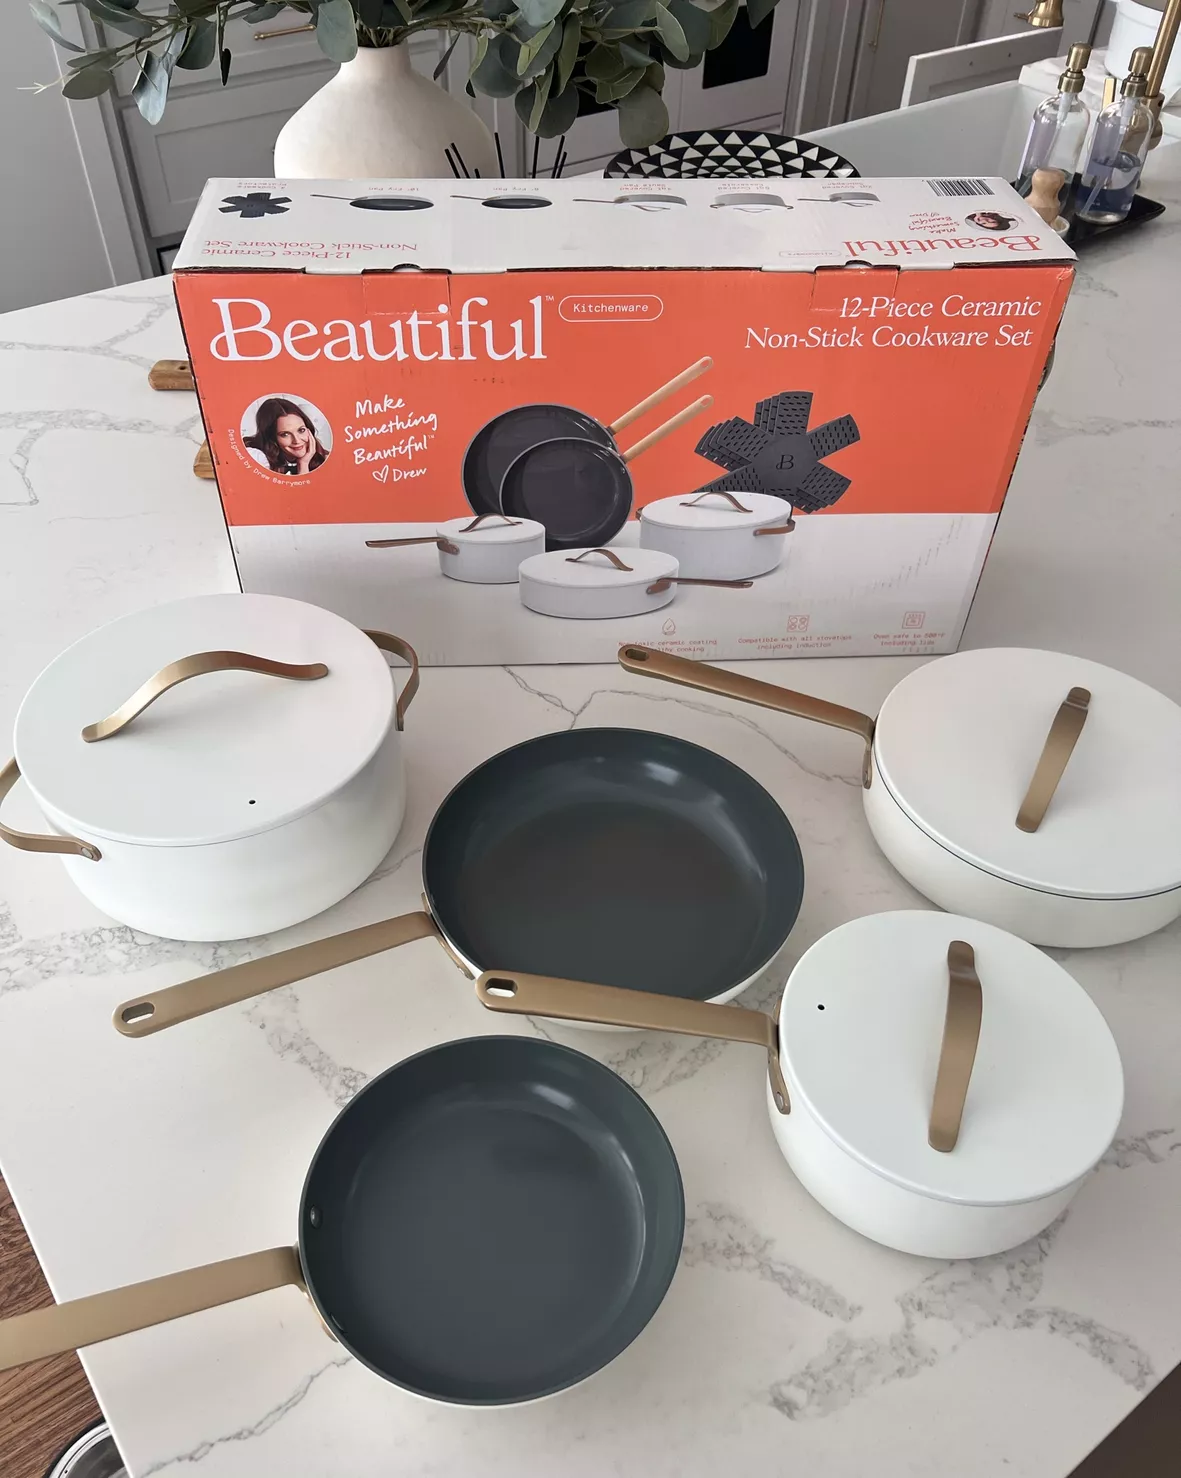 Beautiful 12pc Ceramic Non-Stick Cookware Set, White Icing, by Drew  Barrymore